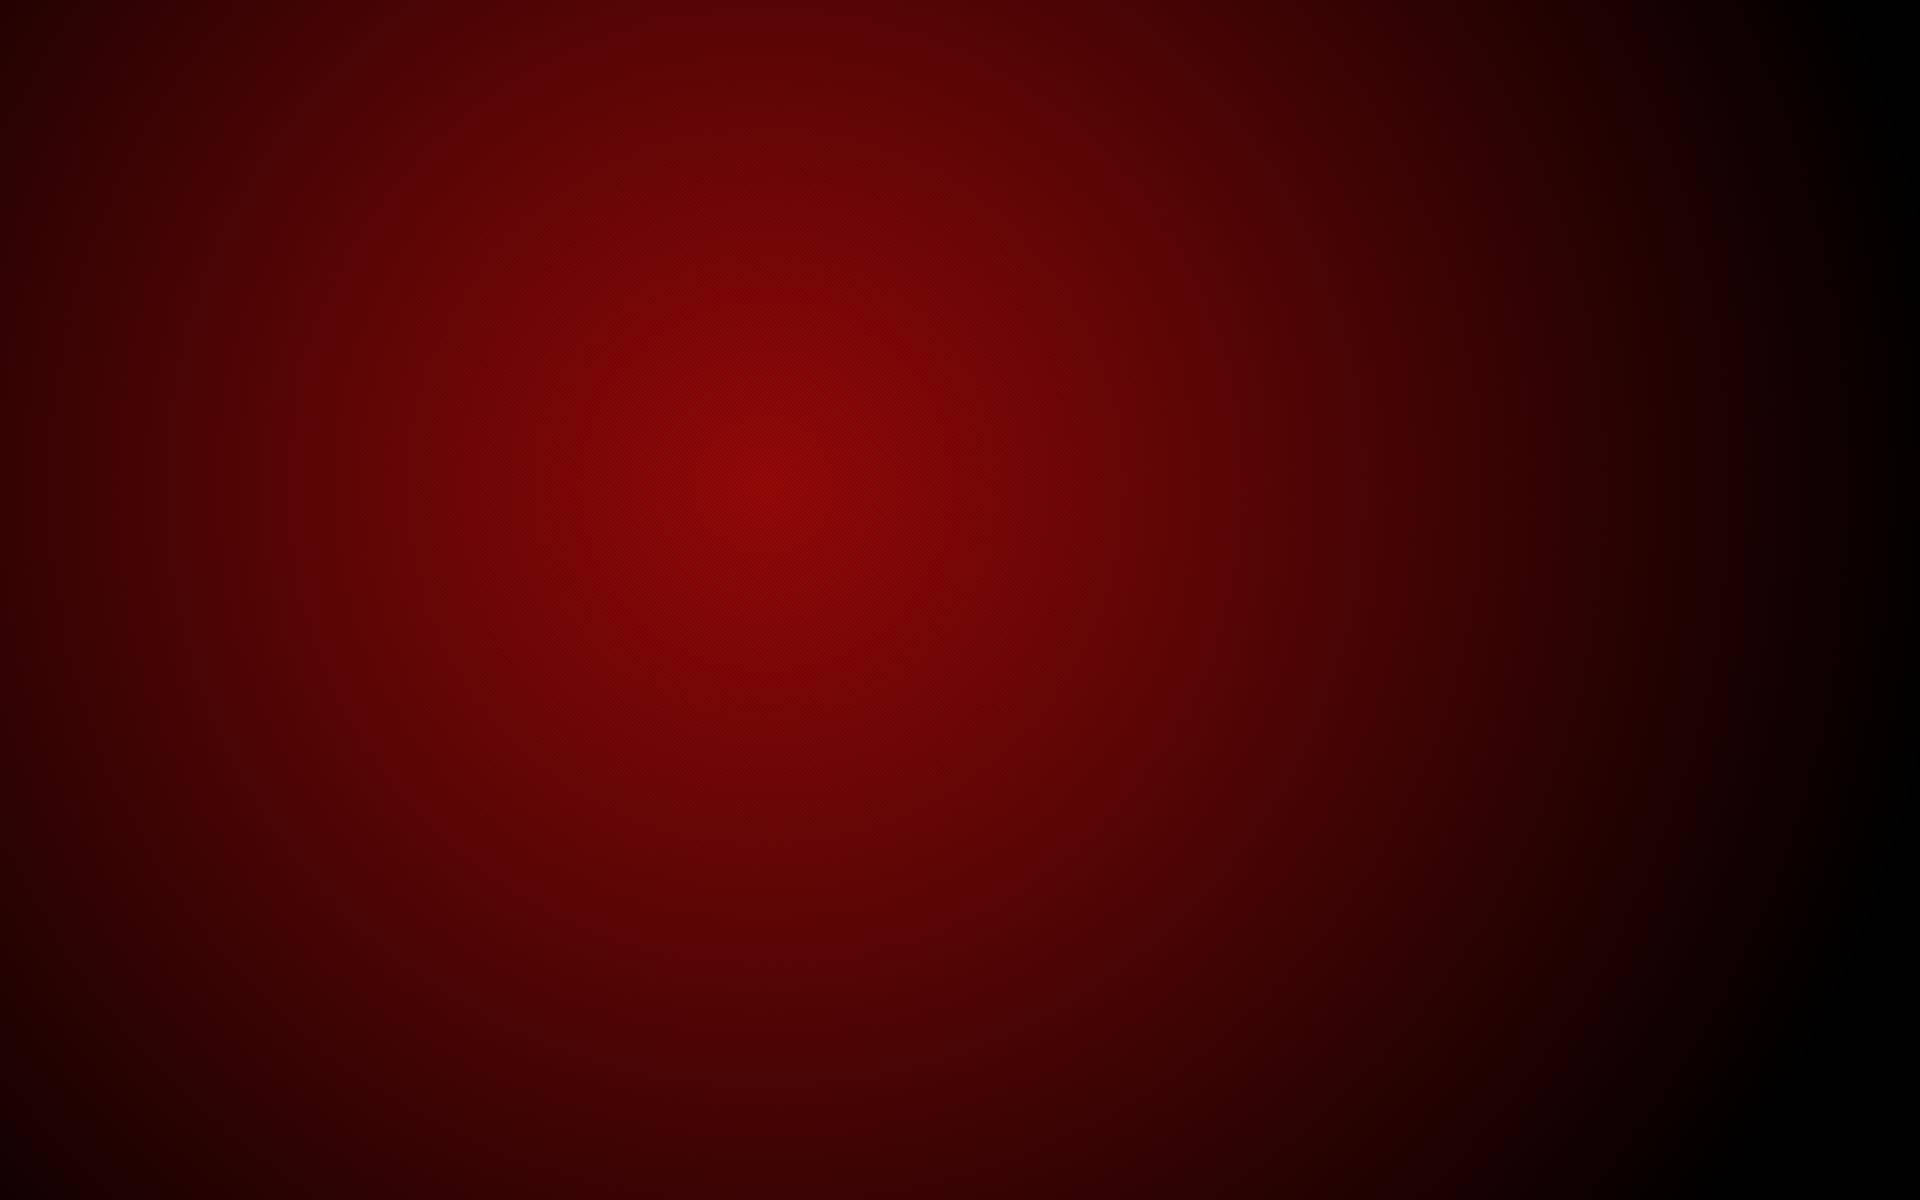 Plain Light Red Background HD Red Aesthetic Wallpapers  HD Wallpapers  ID  56032